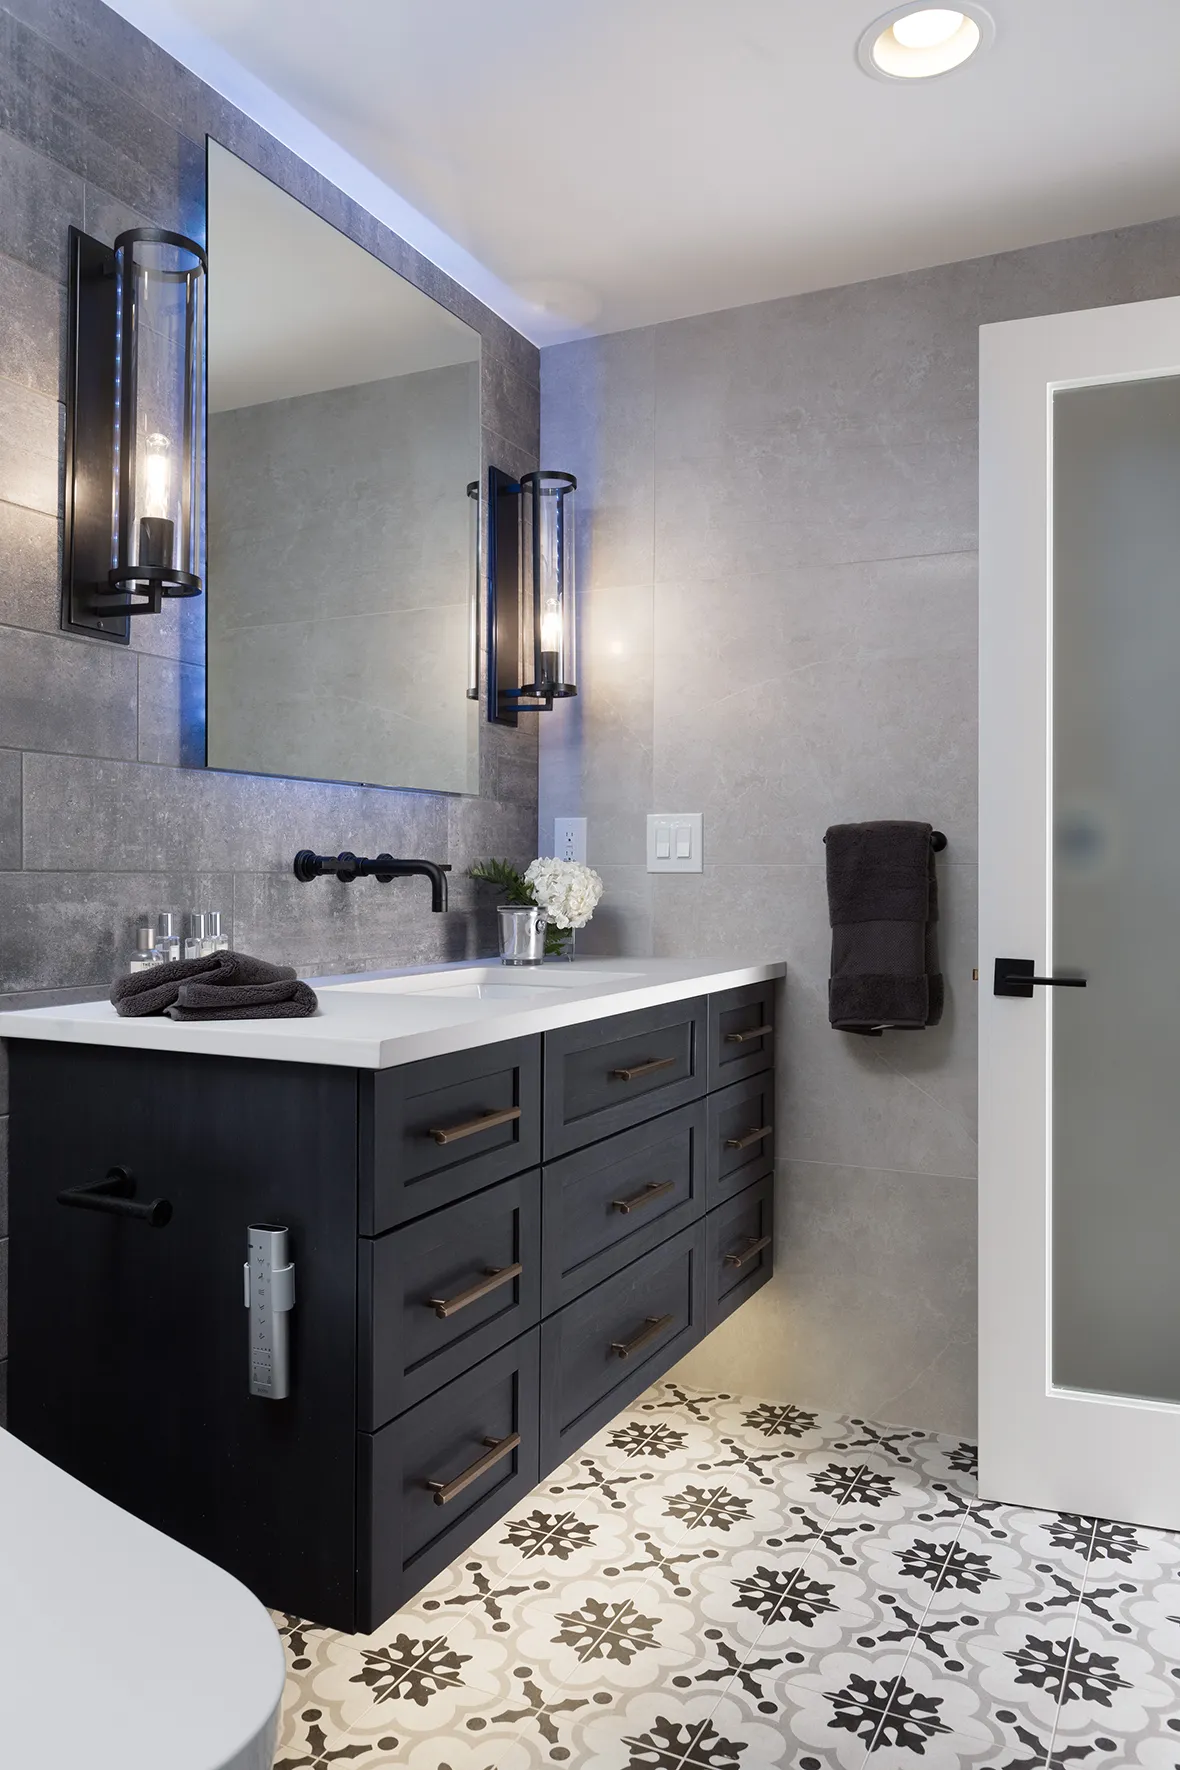 Talbot Diamond Building Full Basement Bathroom with Glowing Mirror Featured